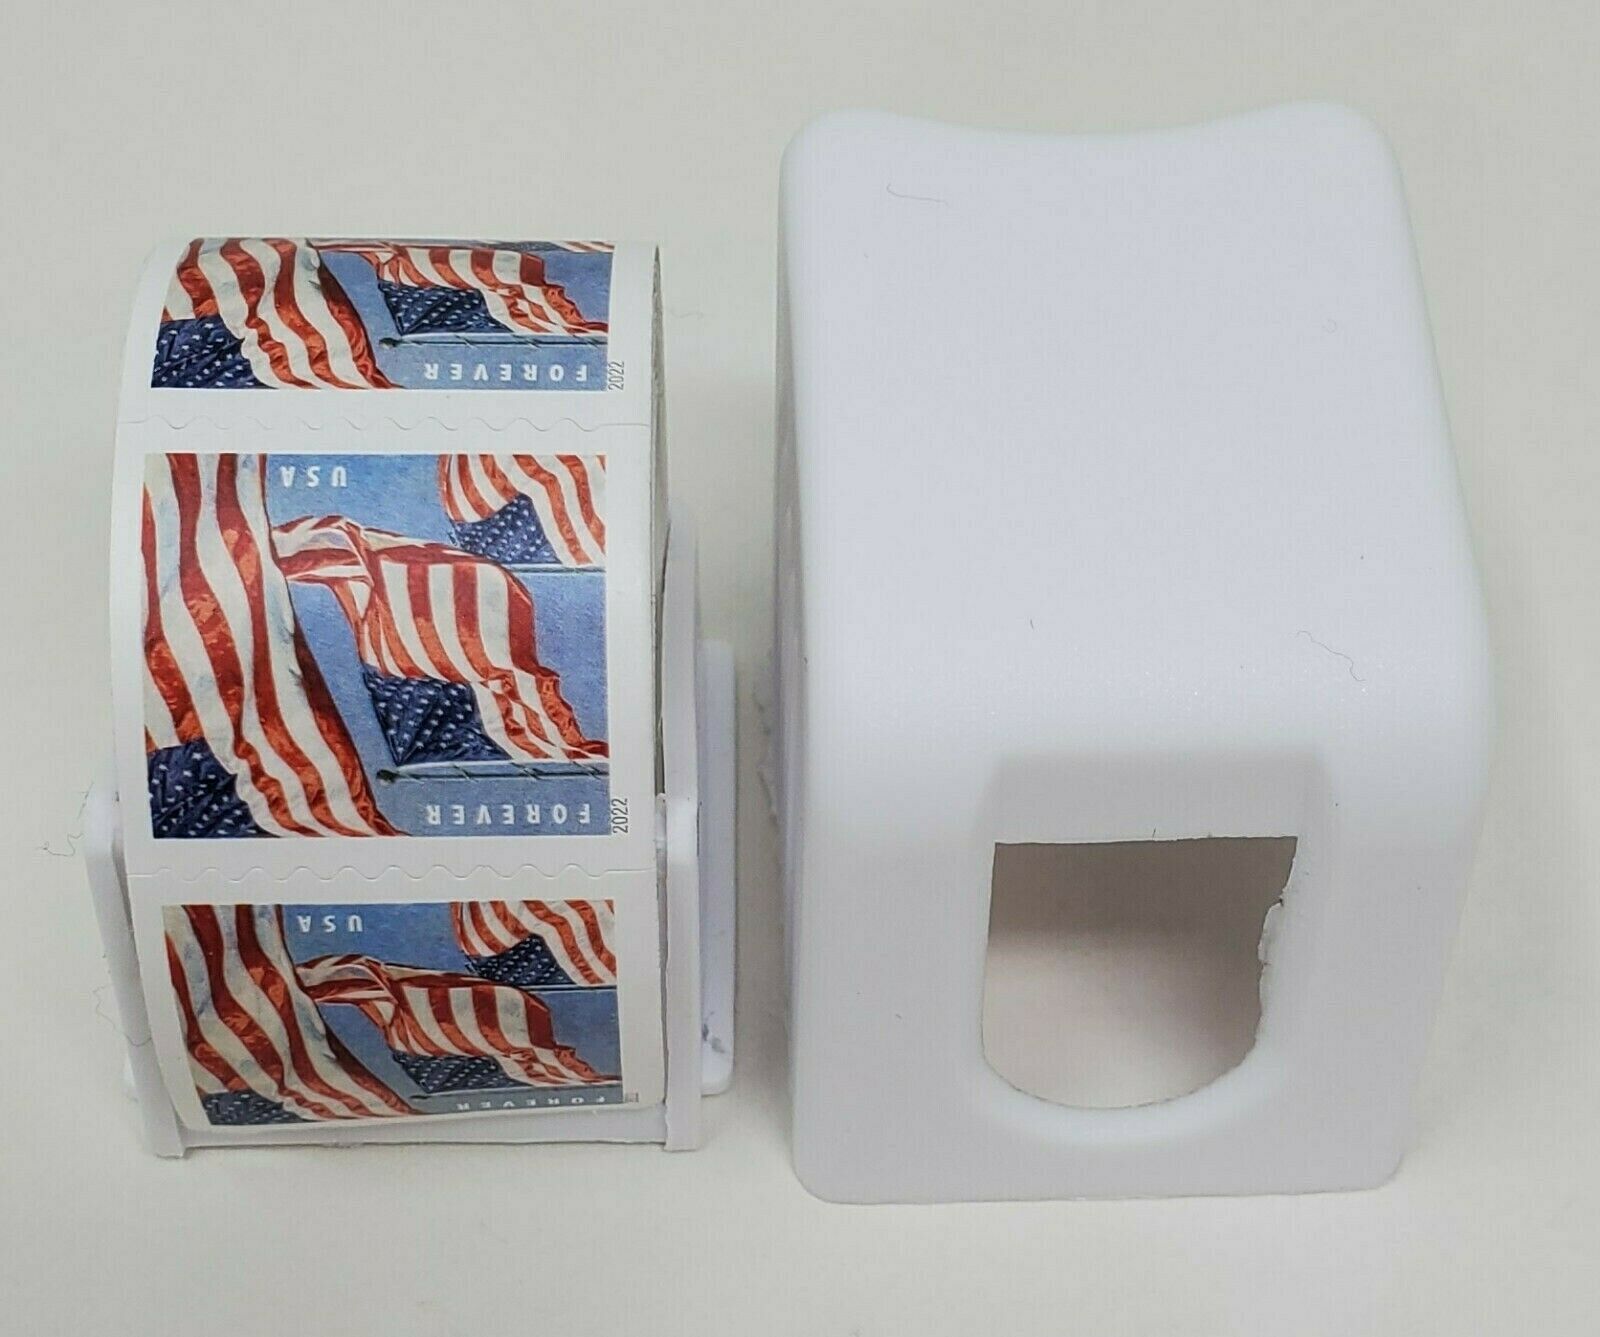 US POSTAL SERVICE ROLL OF 100 FOREVER STAMPS